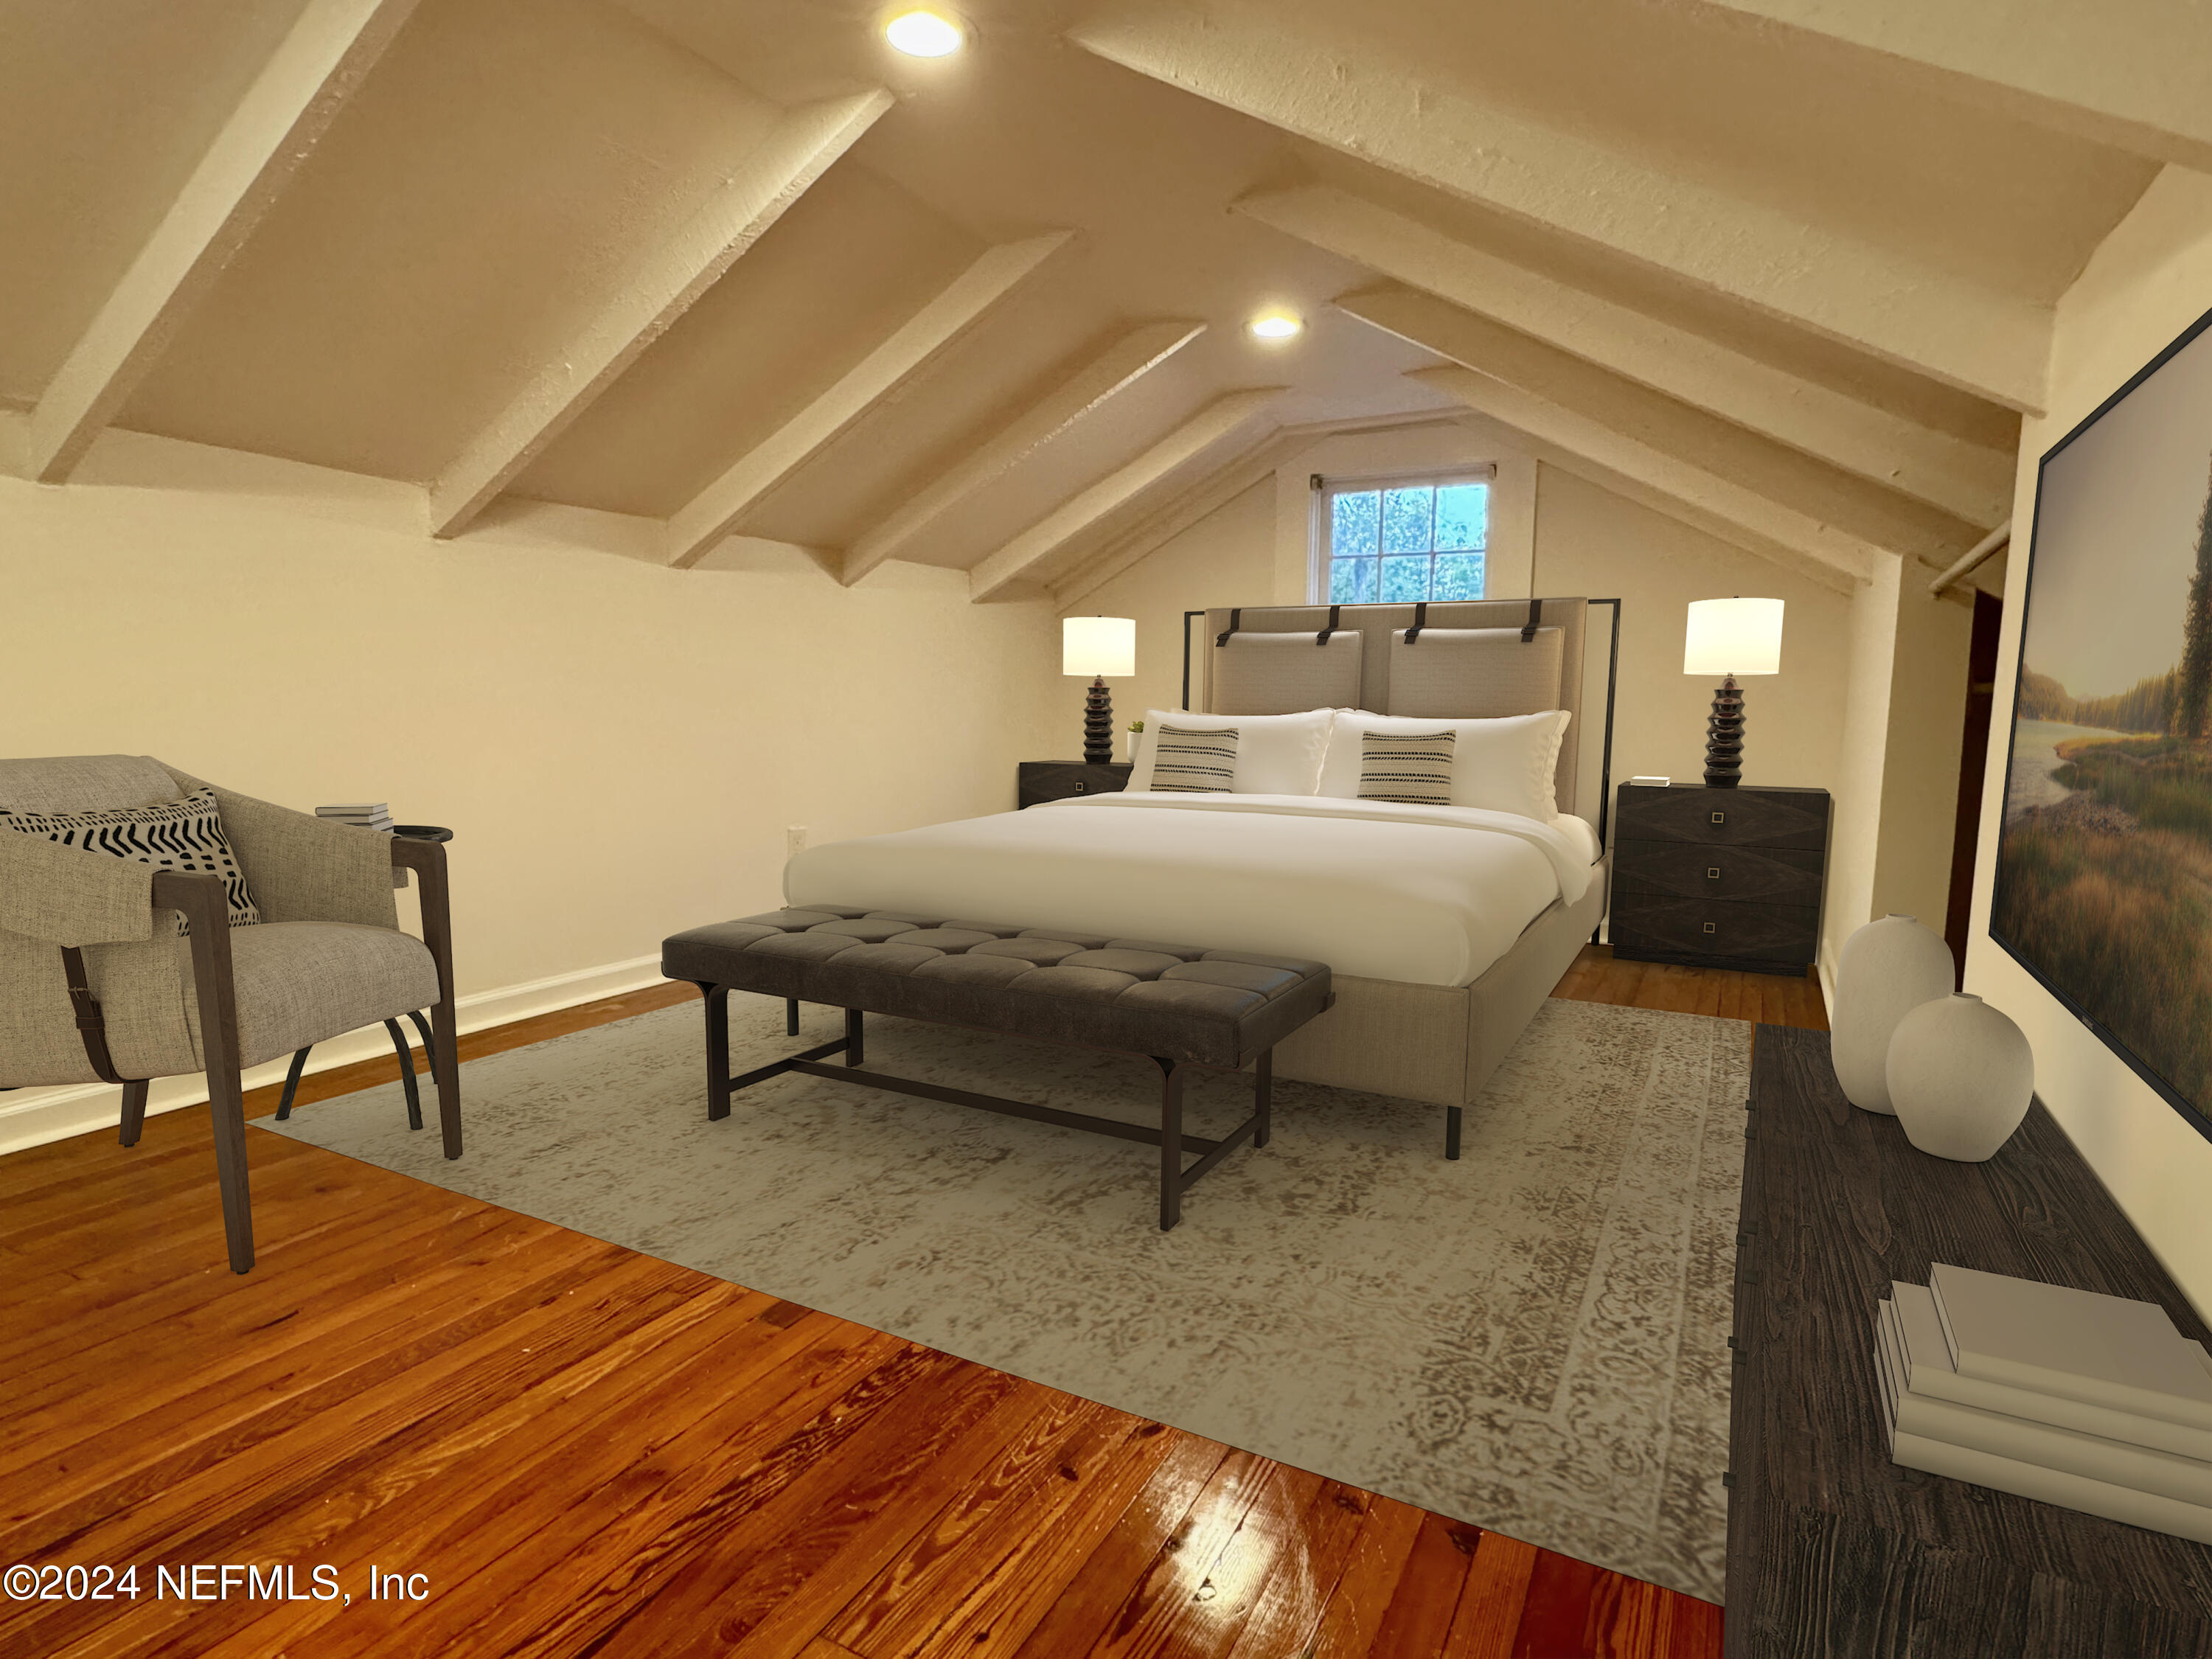 a spacious bedroom with a bed a couch and dresser